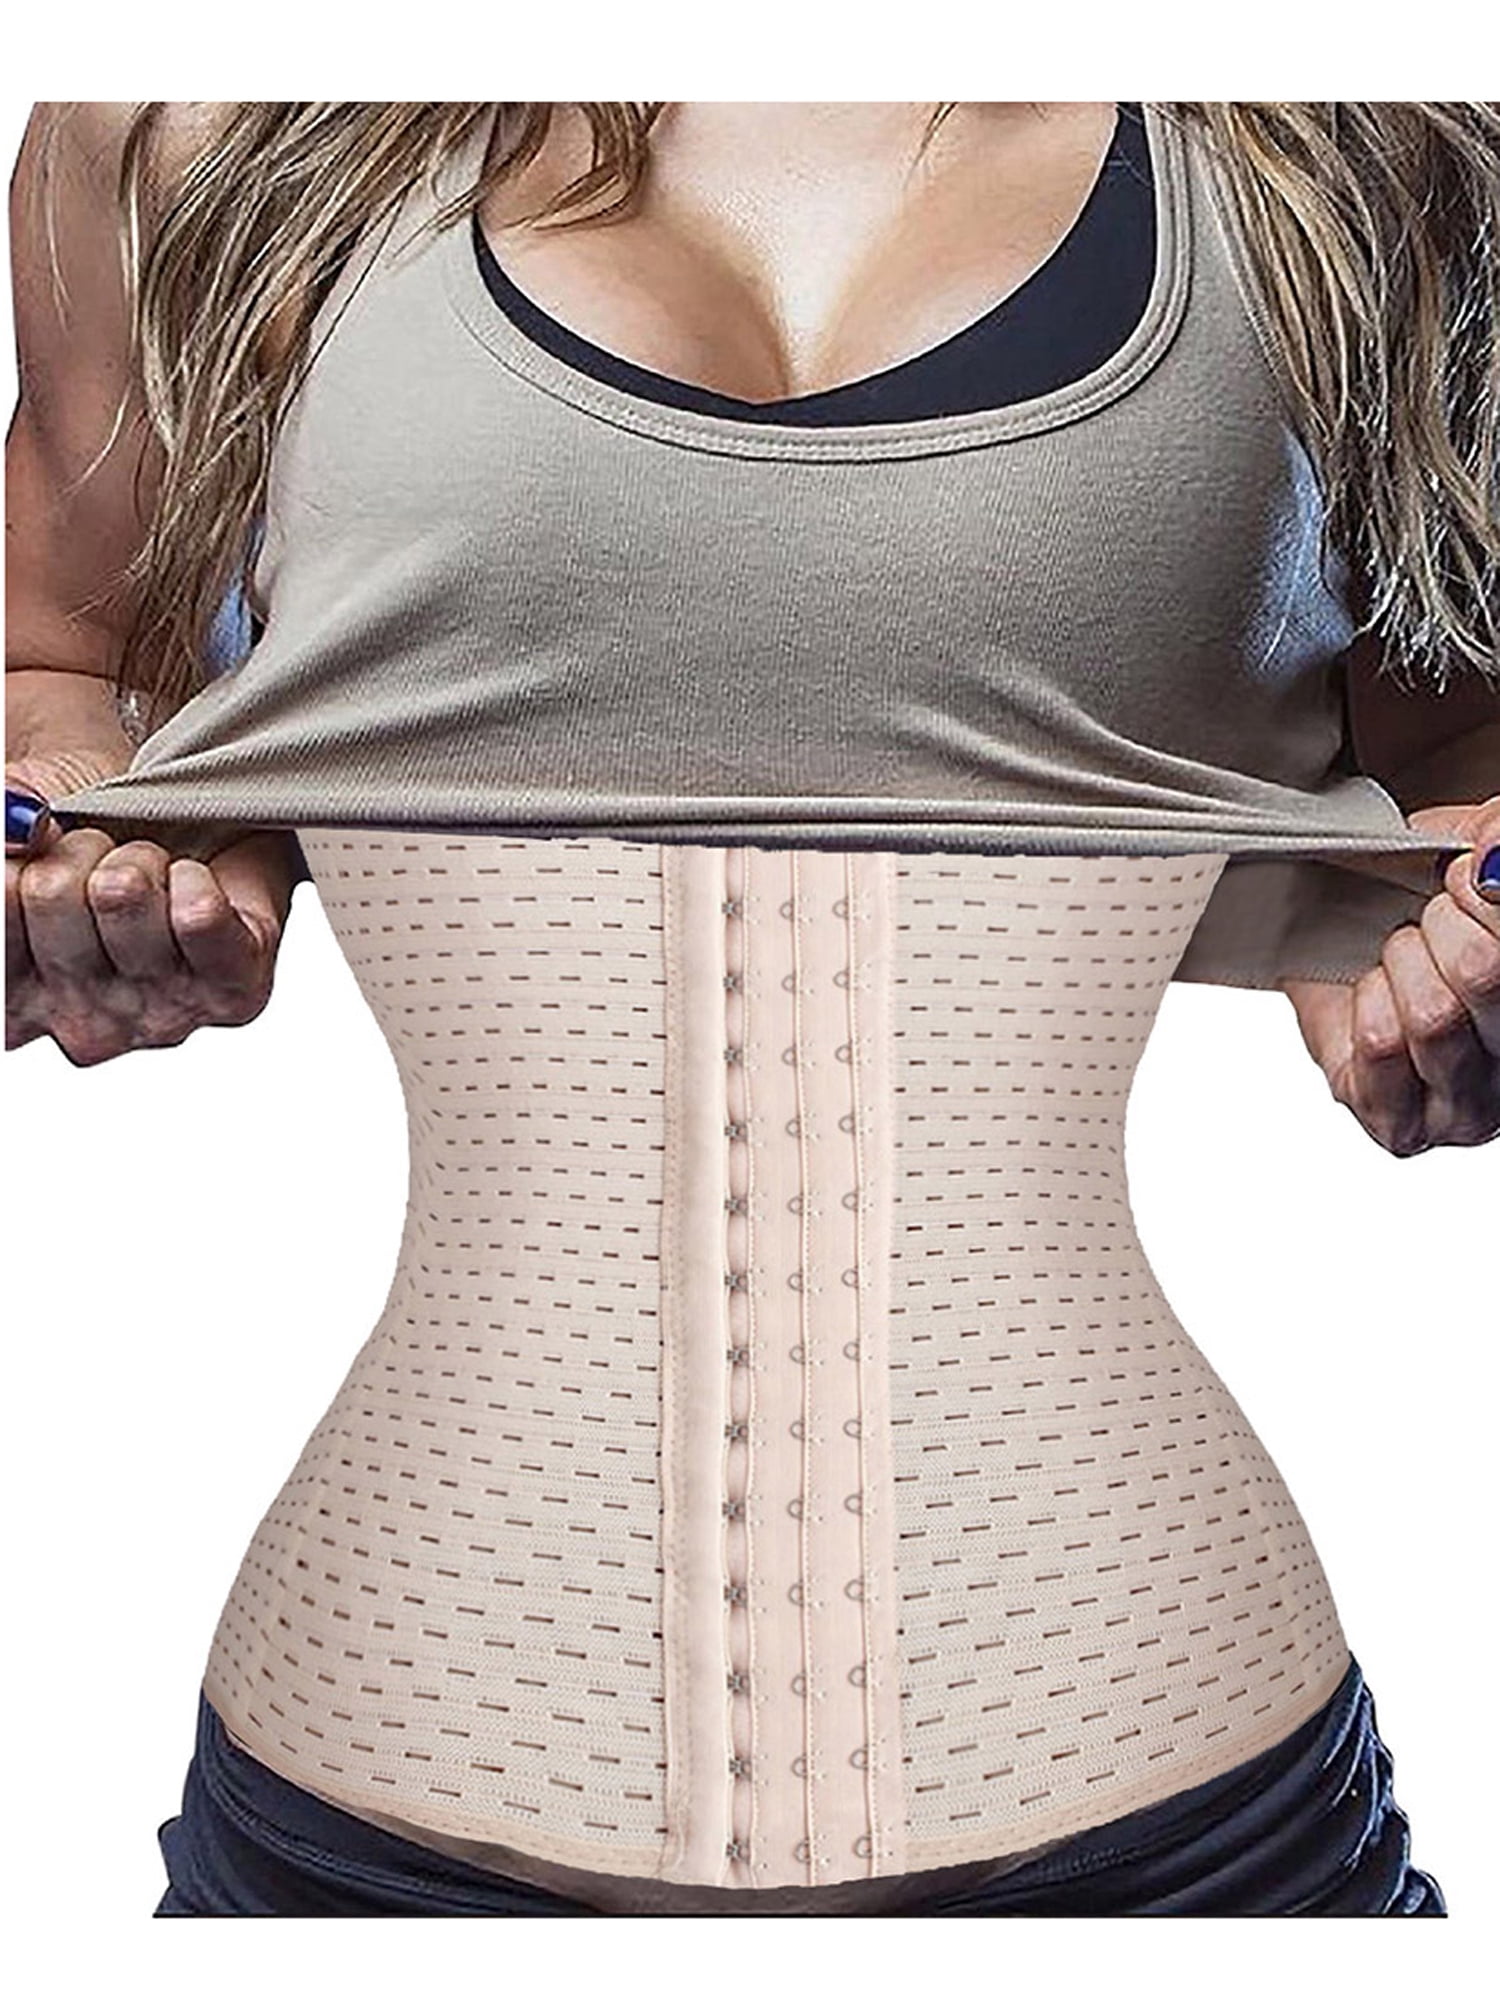 Youloveit Aist Trainer Corset Breathable And Invisible Waist Shaper